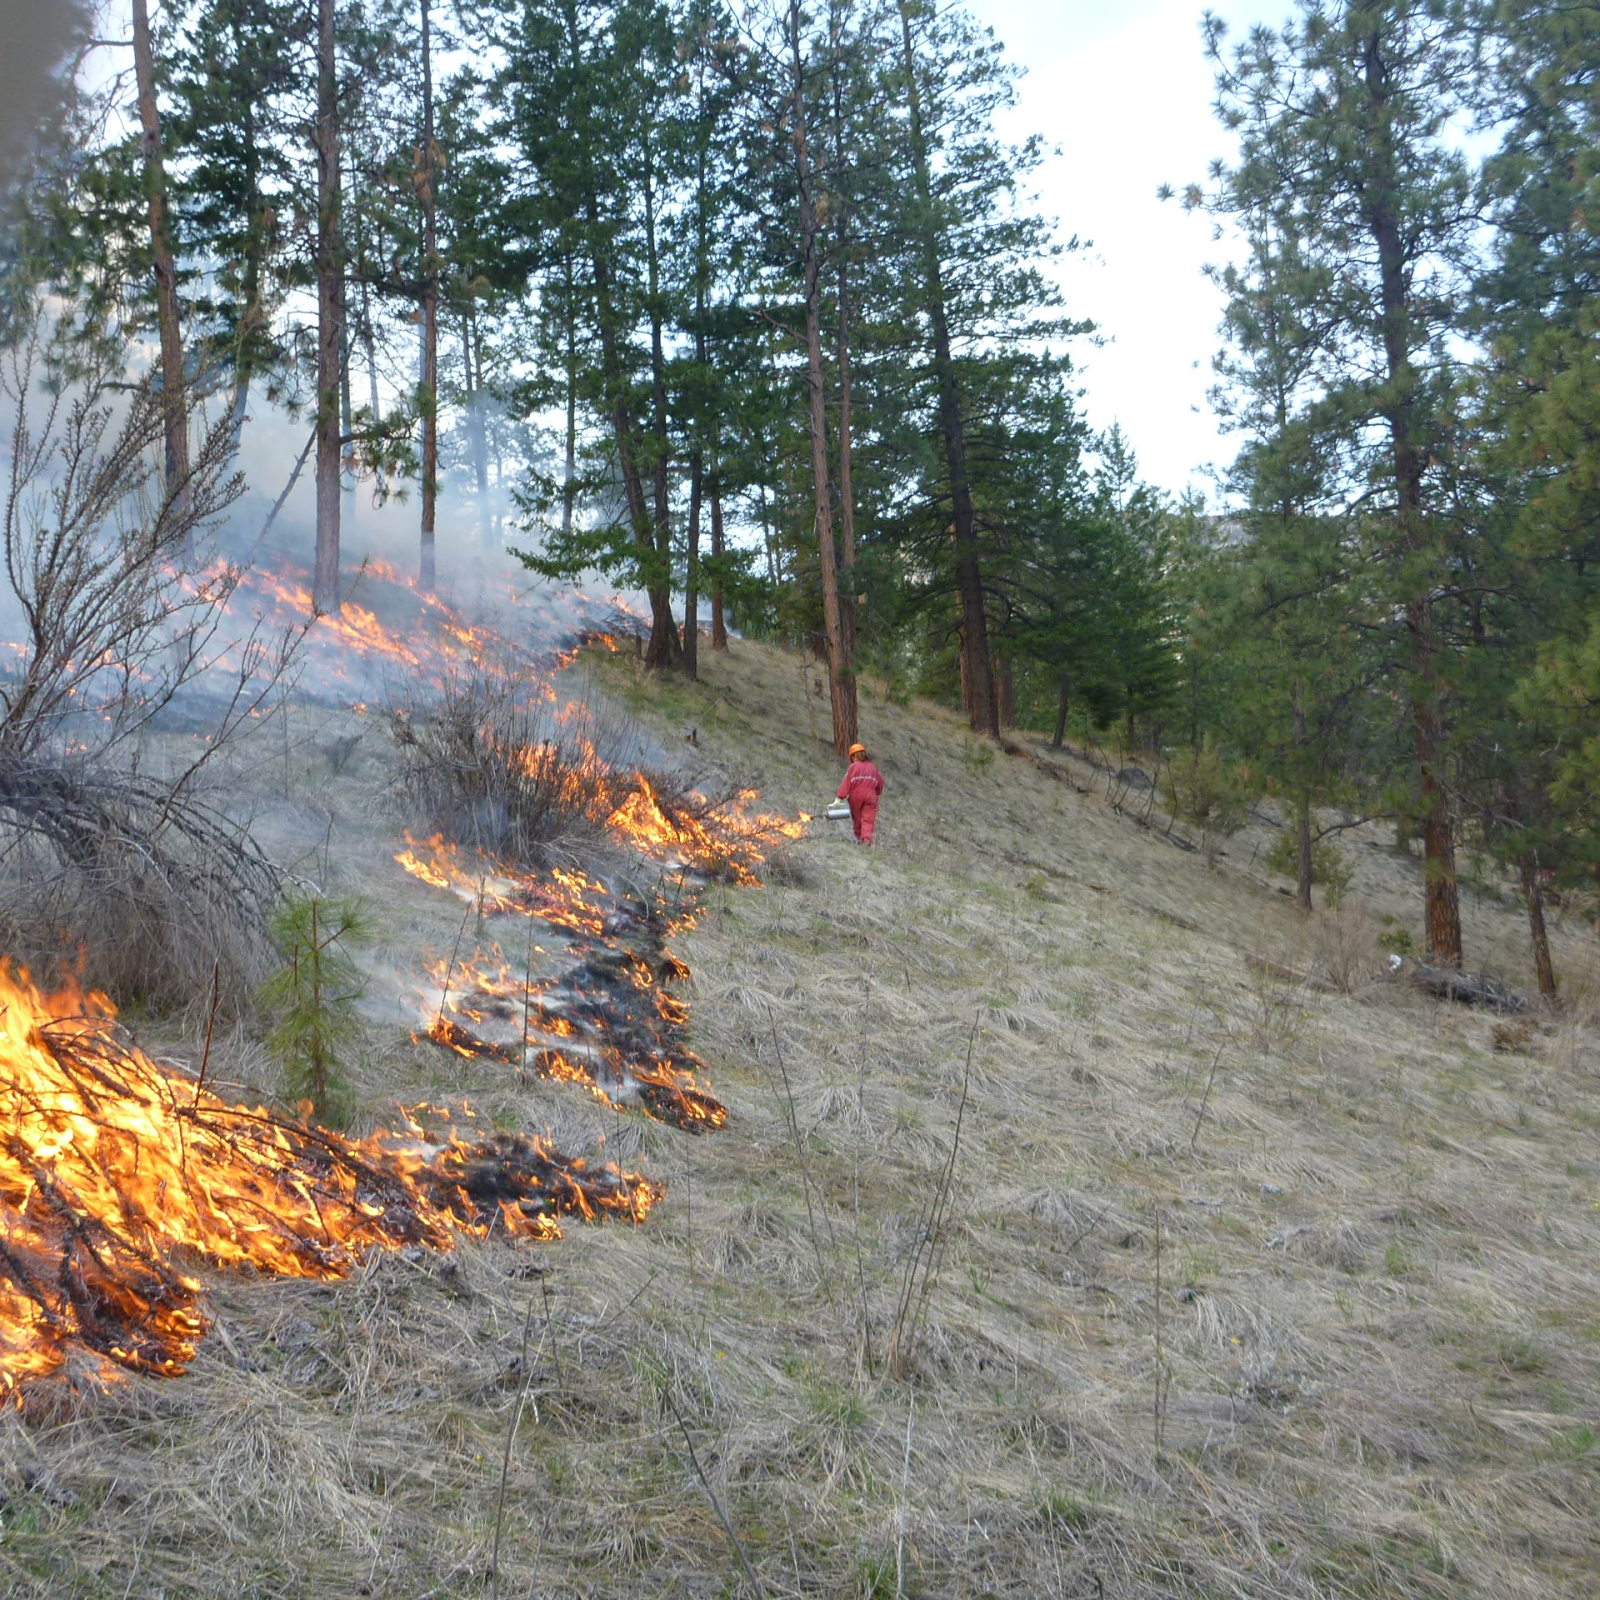 A prescribed burn in a forest in the Okanagan. Photo by Suzie Lavallee